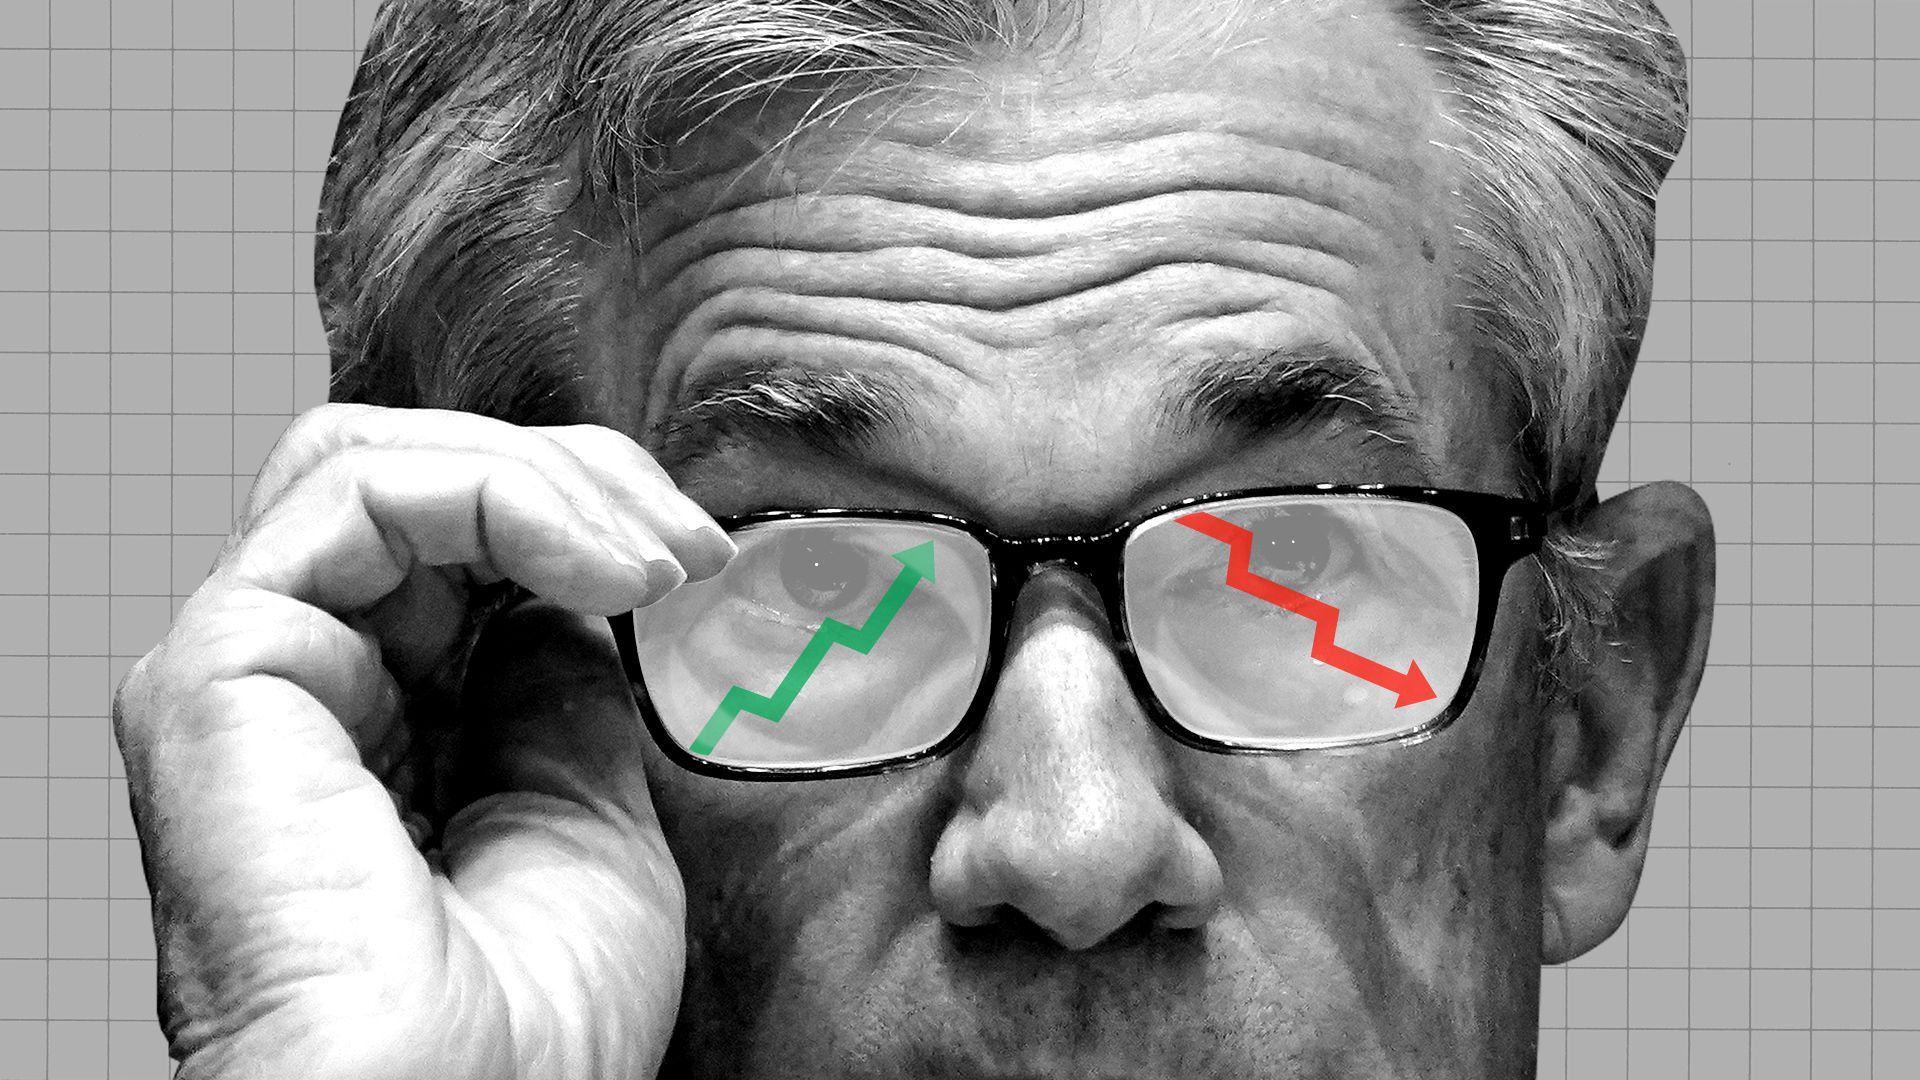 Photo illustration of Jerome Powell with markets arrows in his glasses lenses.